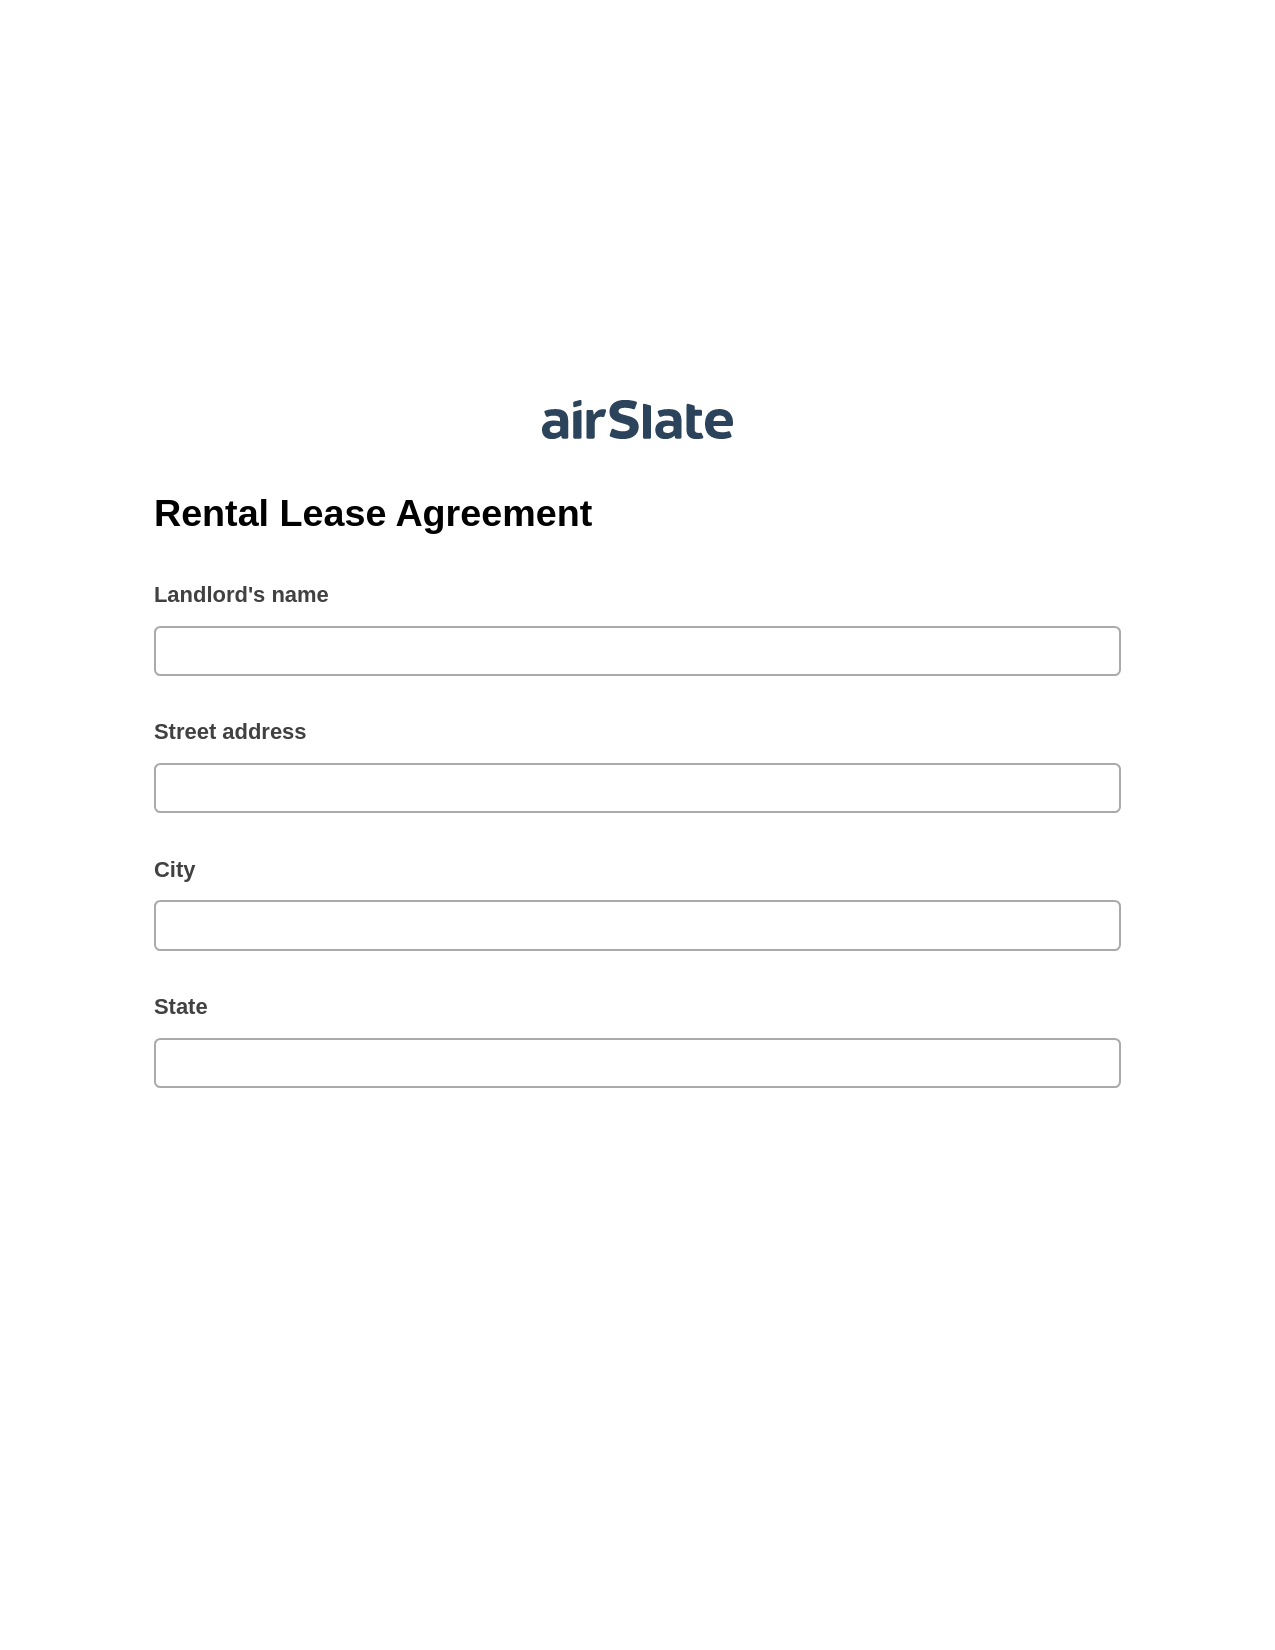 Rental Lease Agreement Pre-fill from MySQL Dropdown Options Bot, Update NetSuite Records Bot, Export to Salesforce Bot